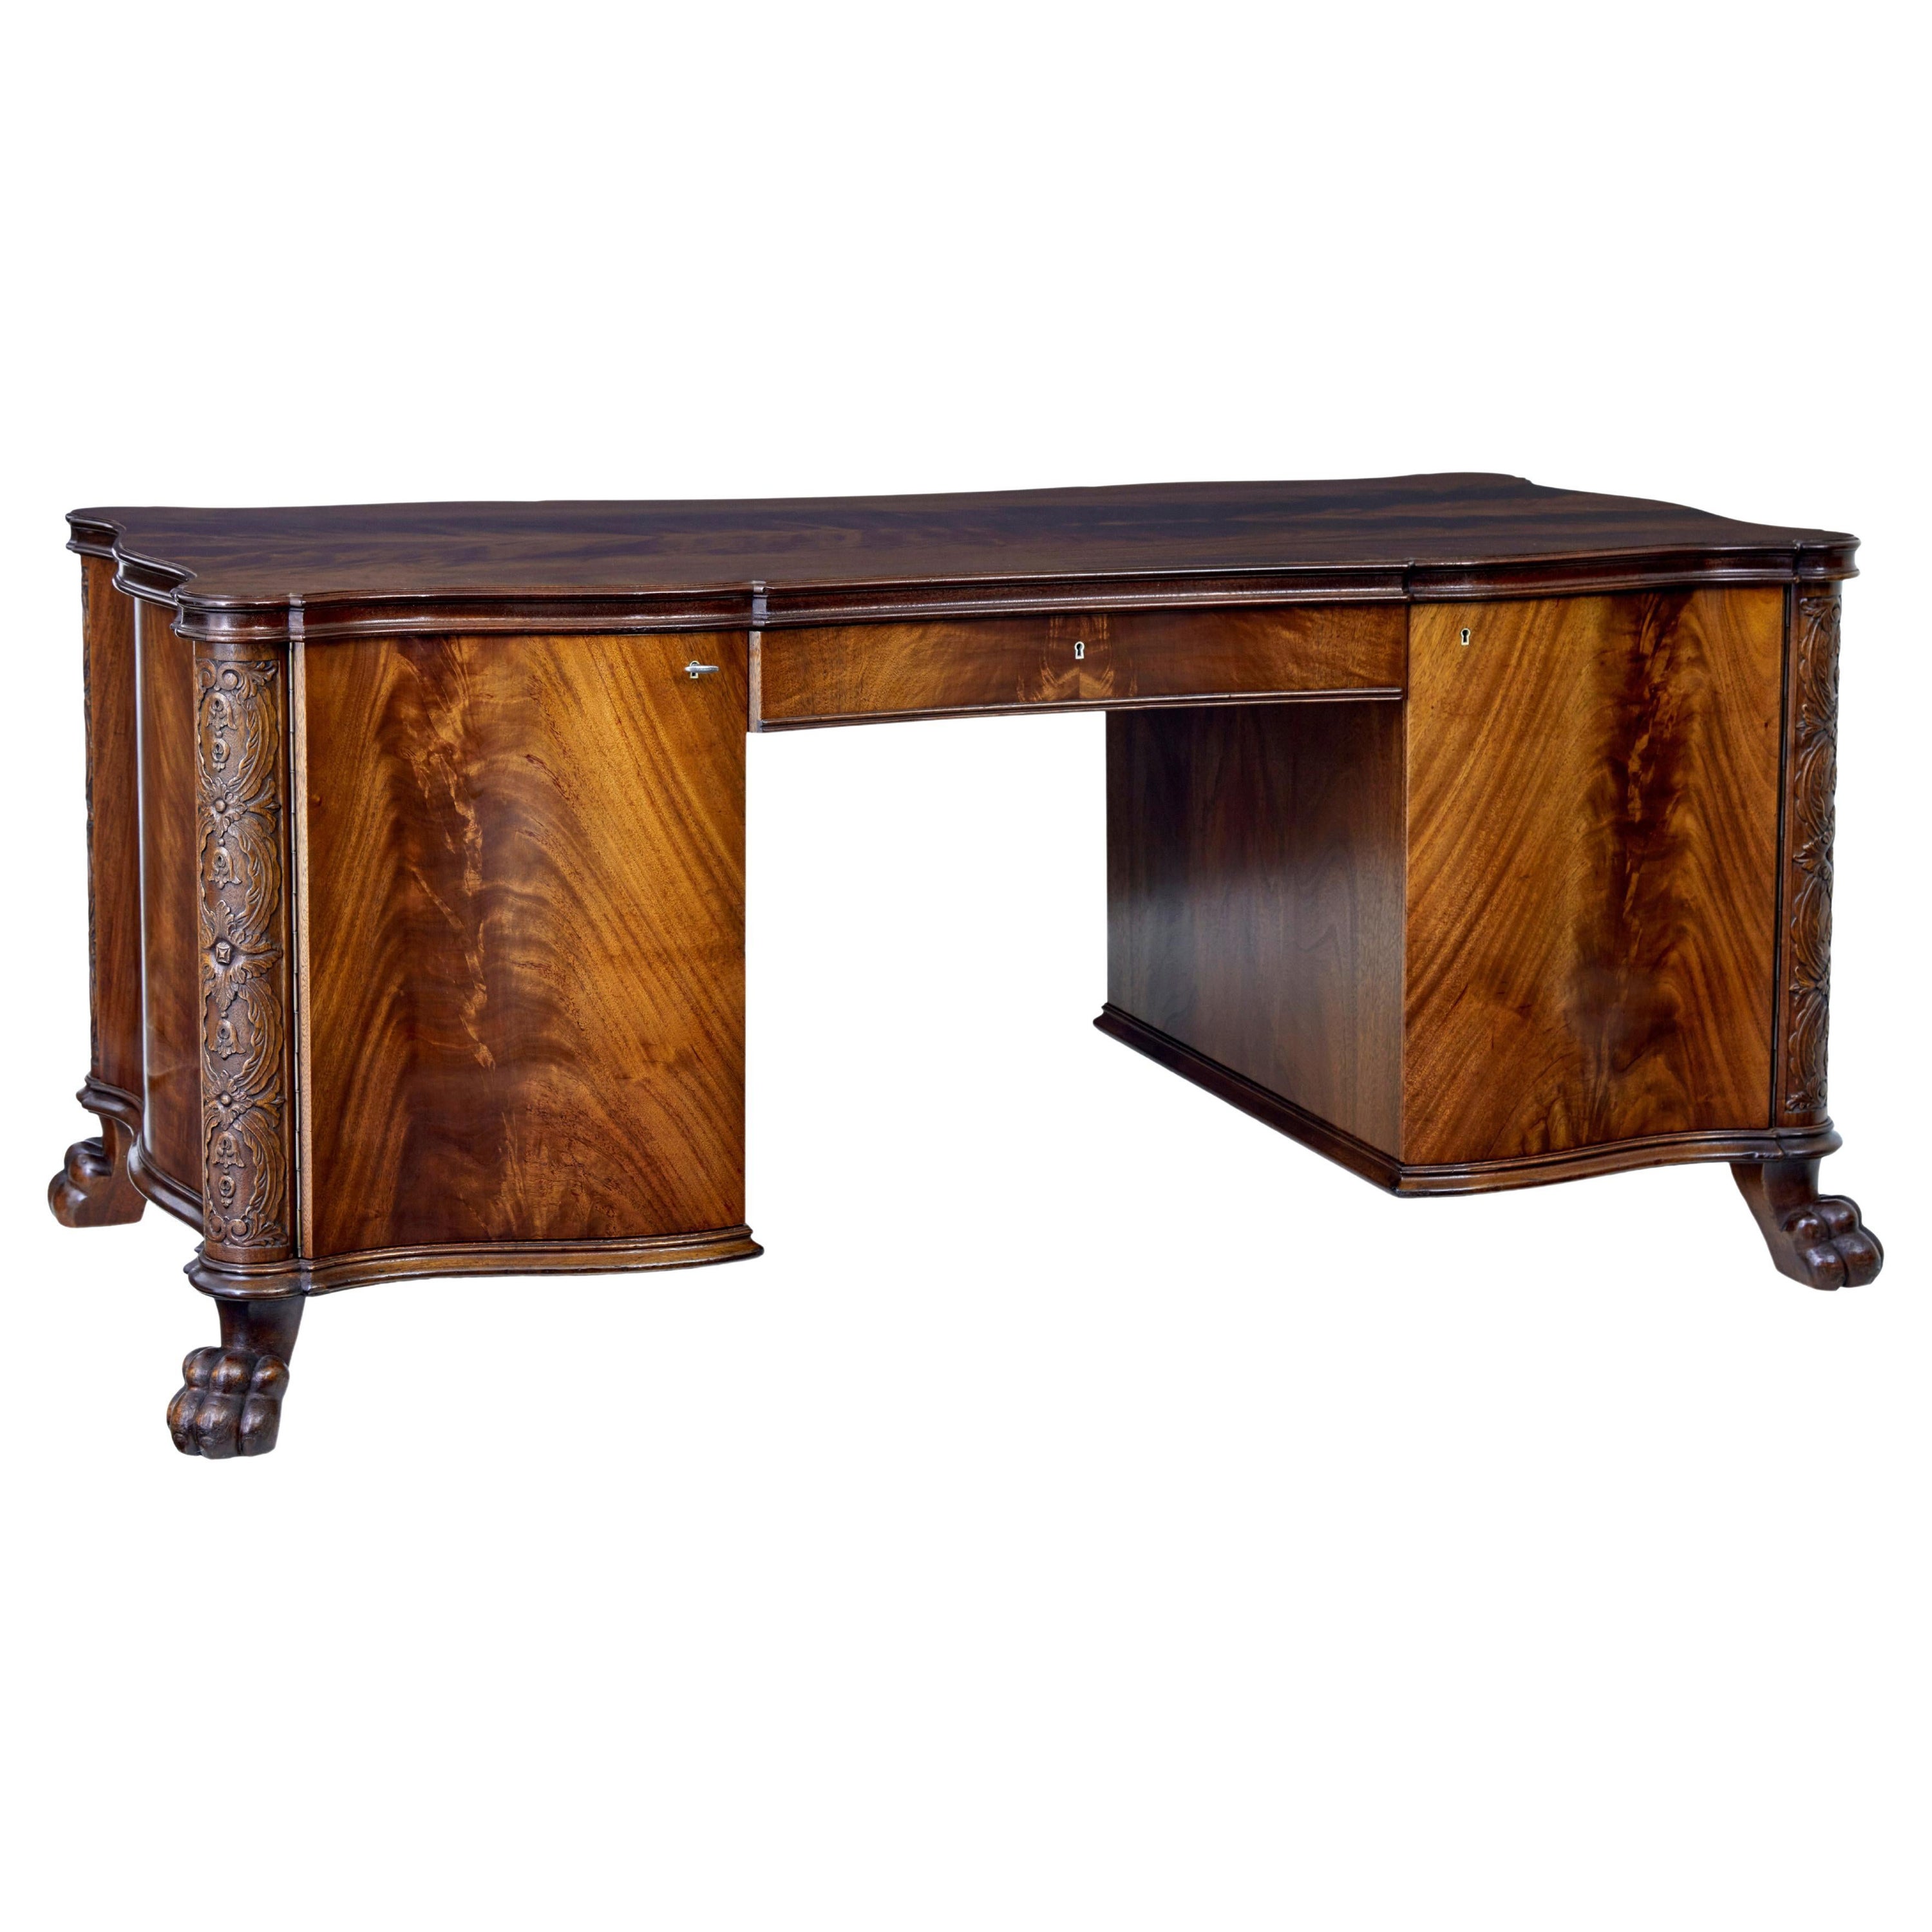 Mid 20th century carved mahogany Swedish desk For Sale